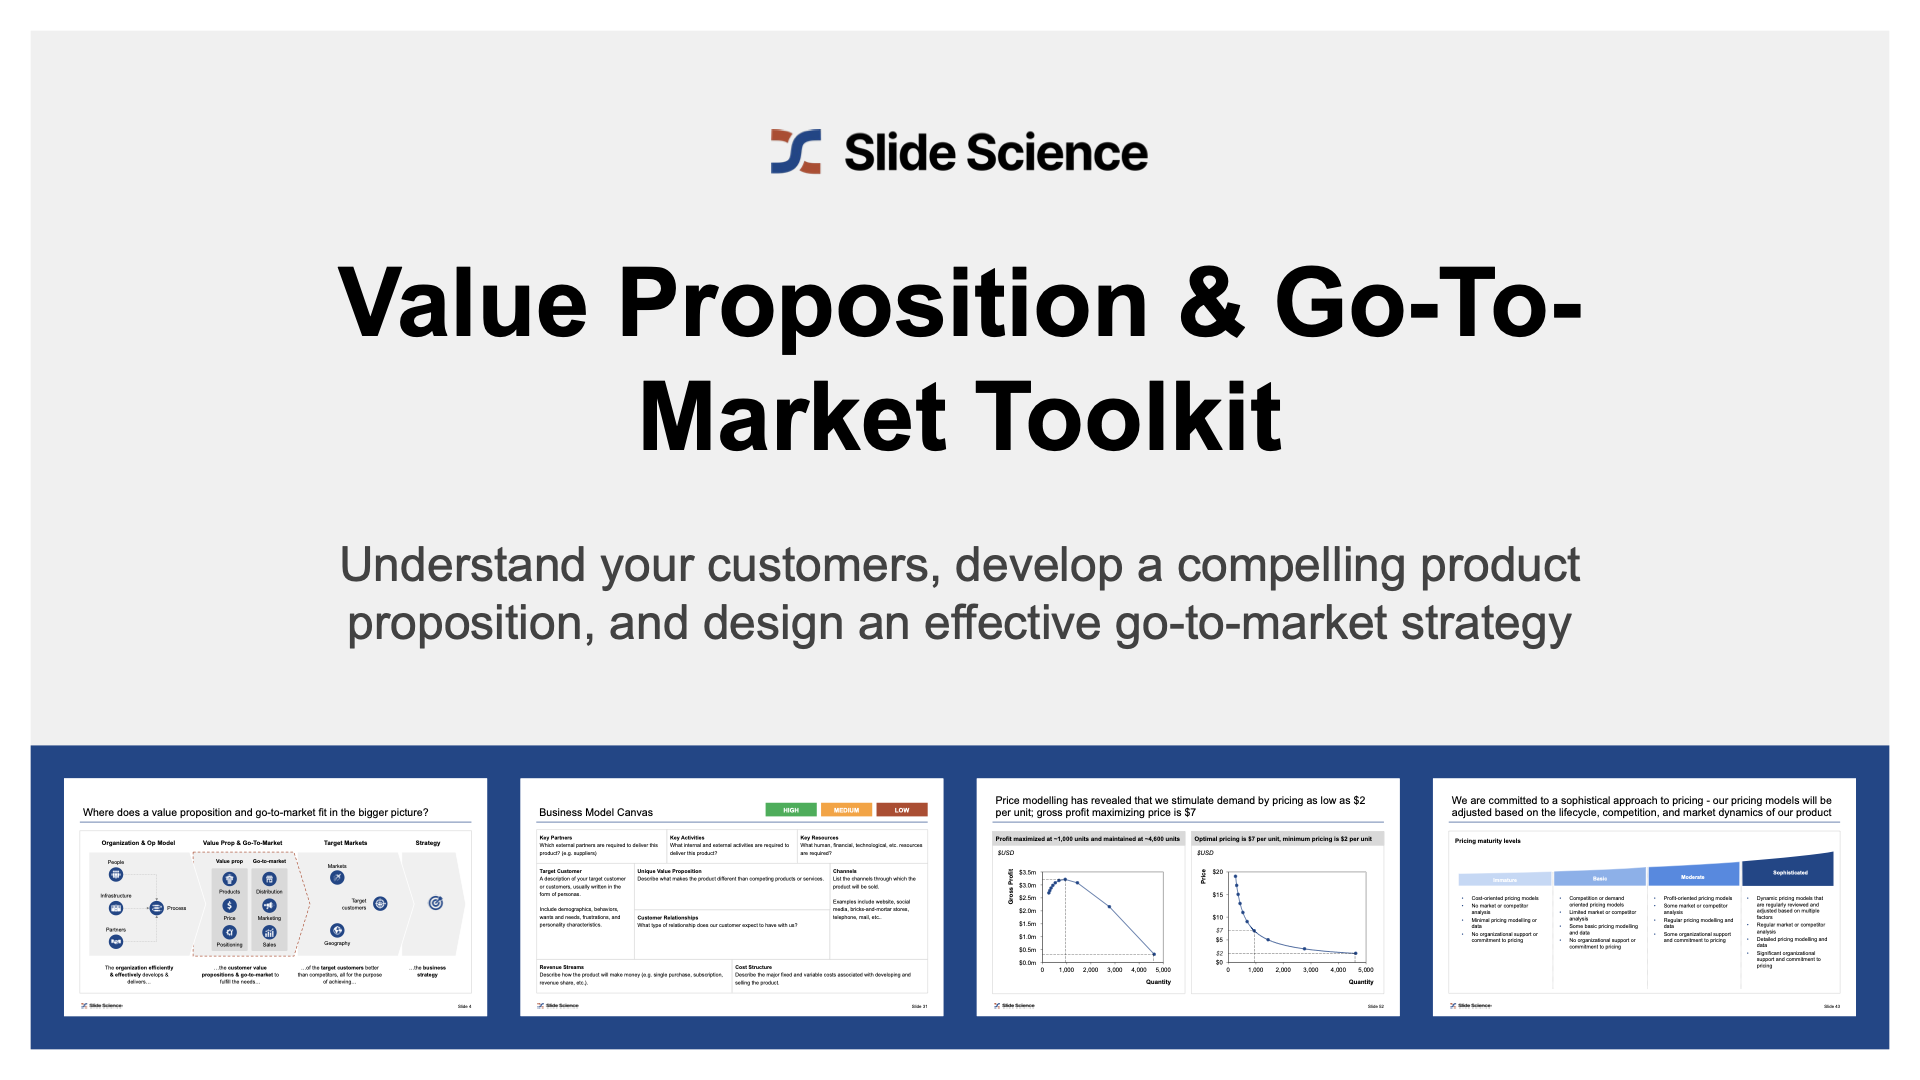 Value Proposition & Go-To-Market Toolkit